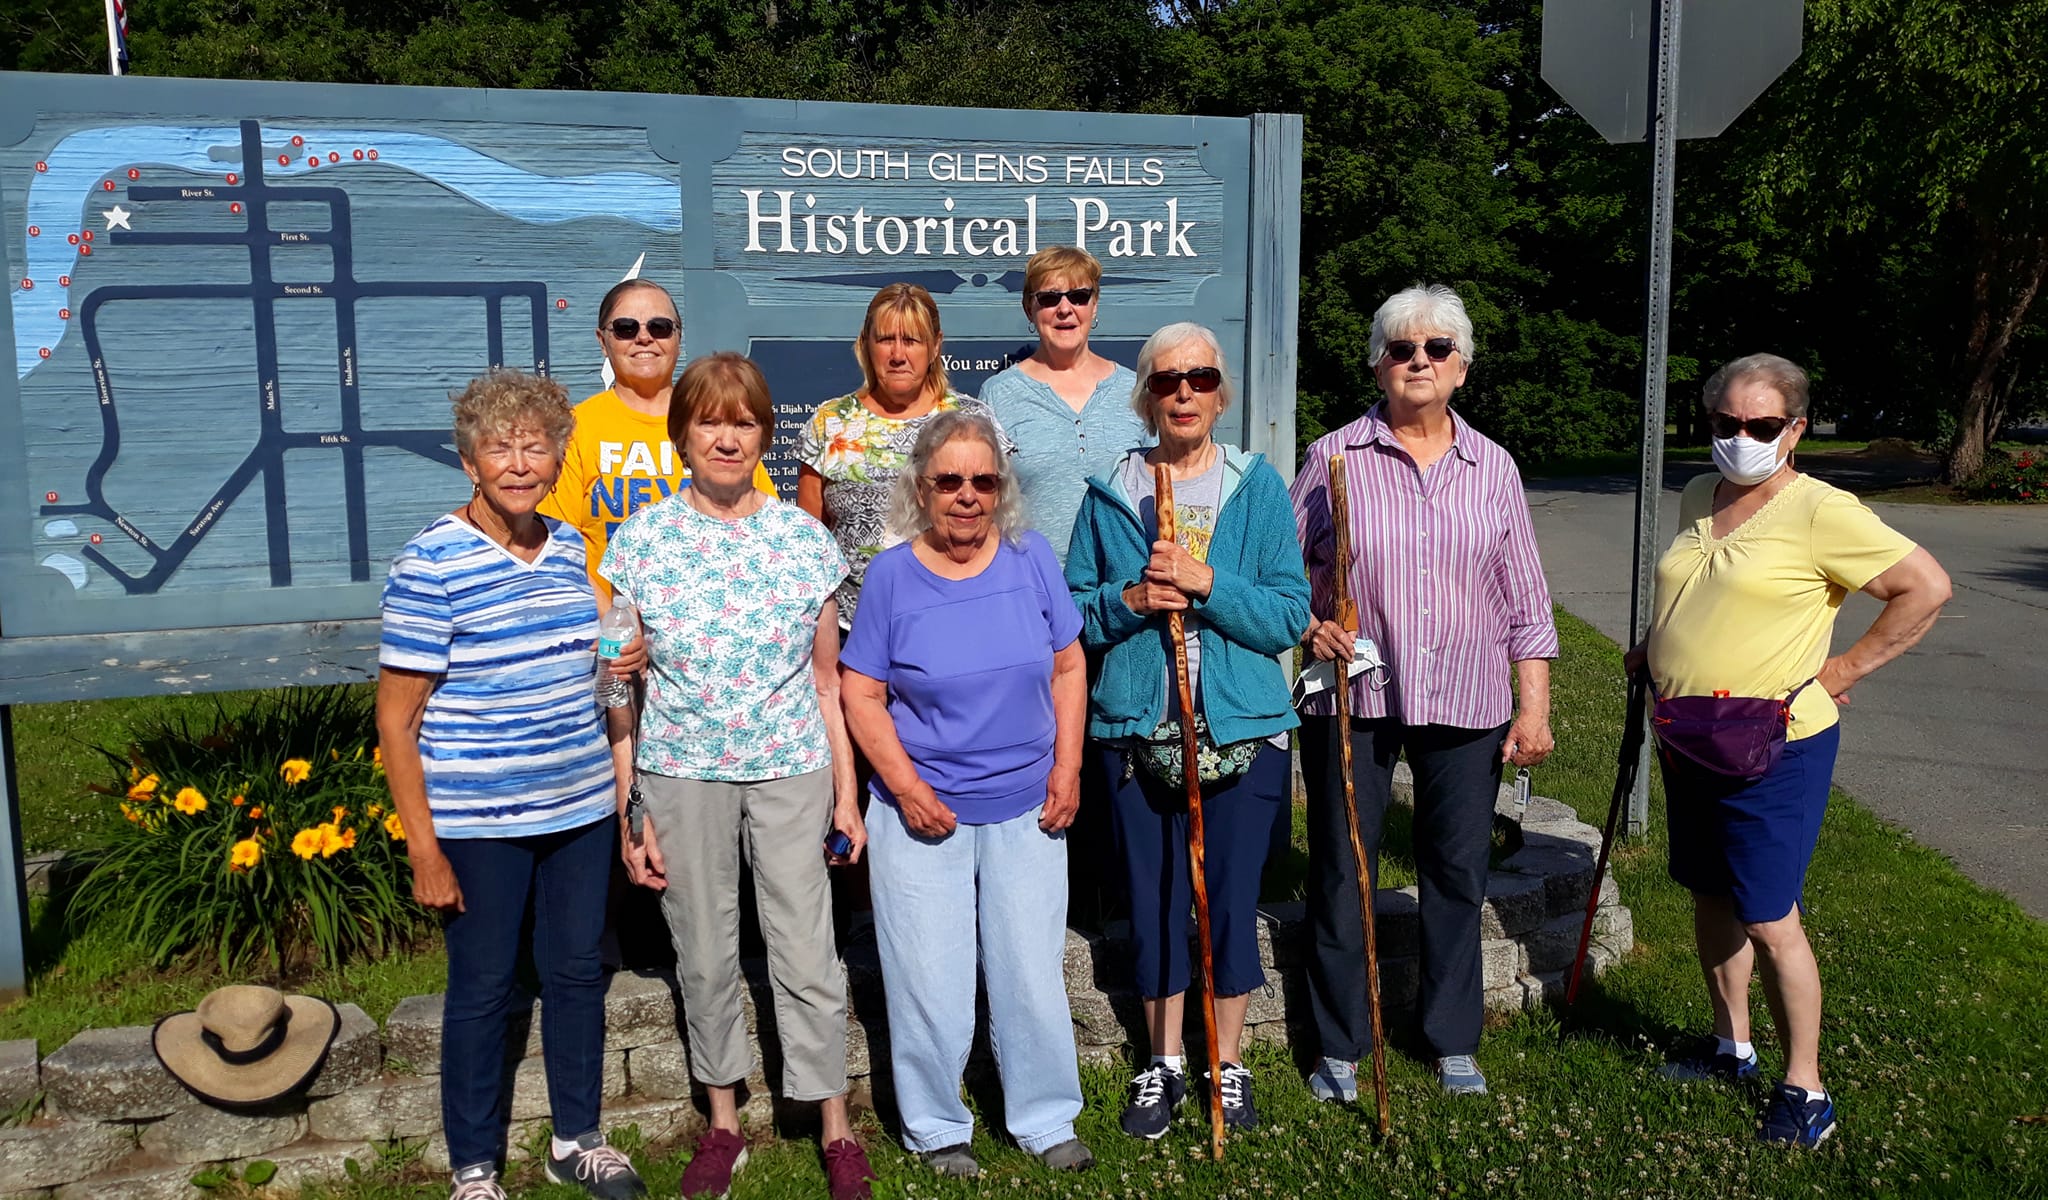 Nine ladies of Walking group stand in front of sign